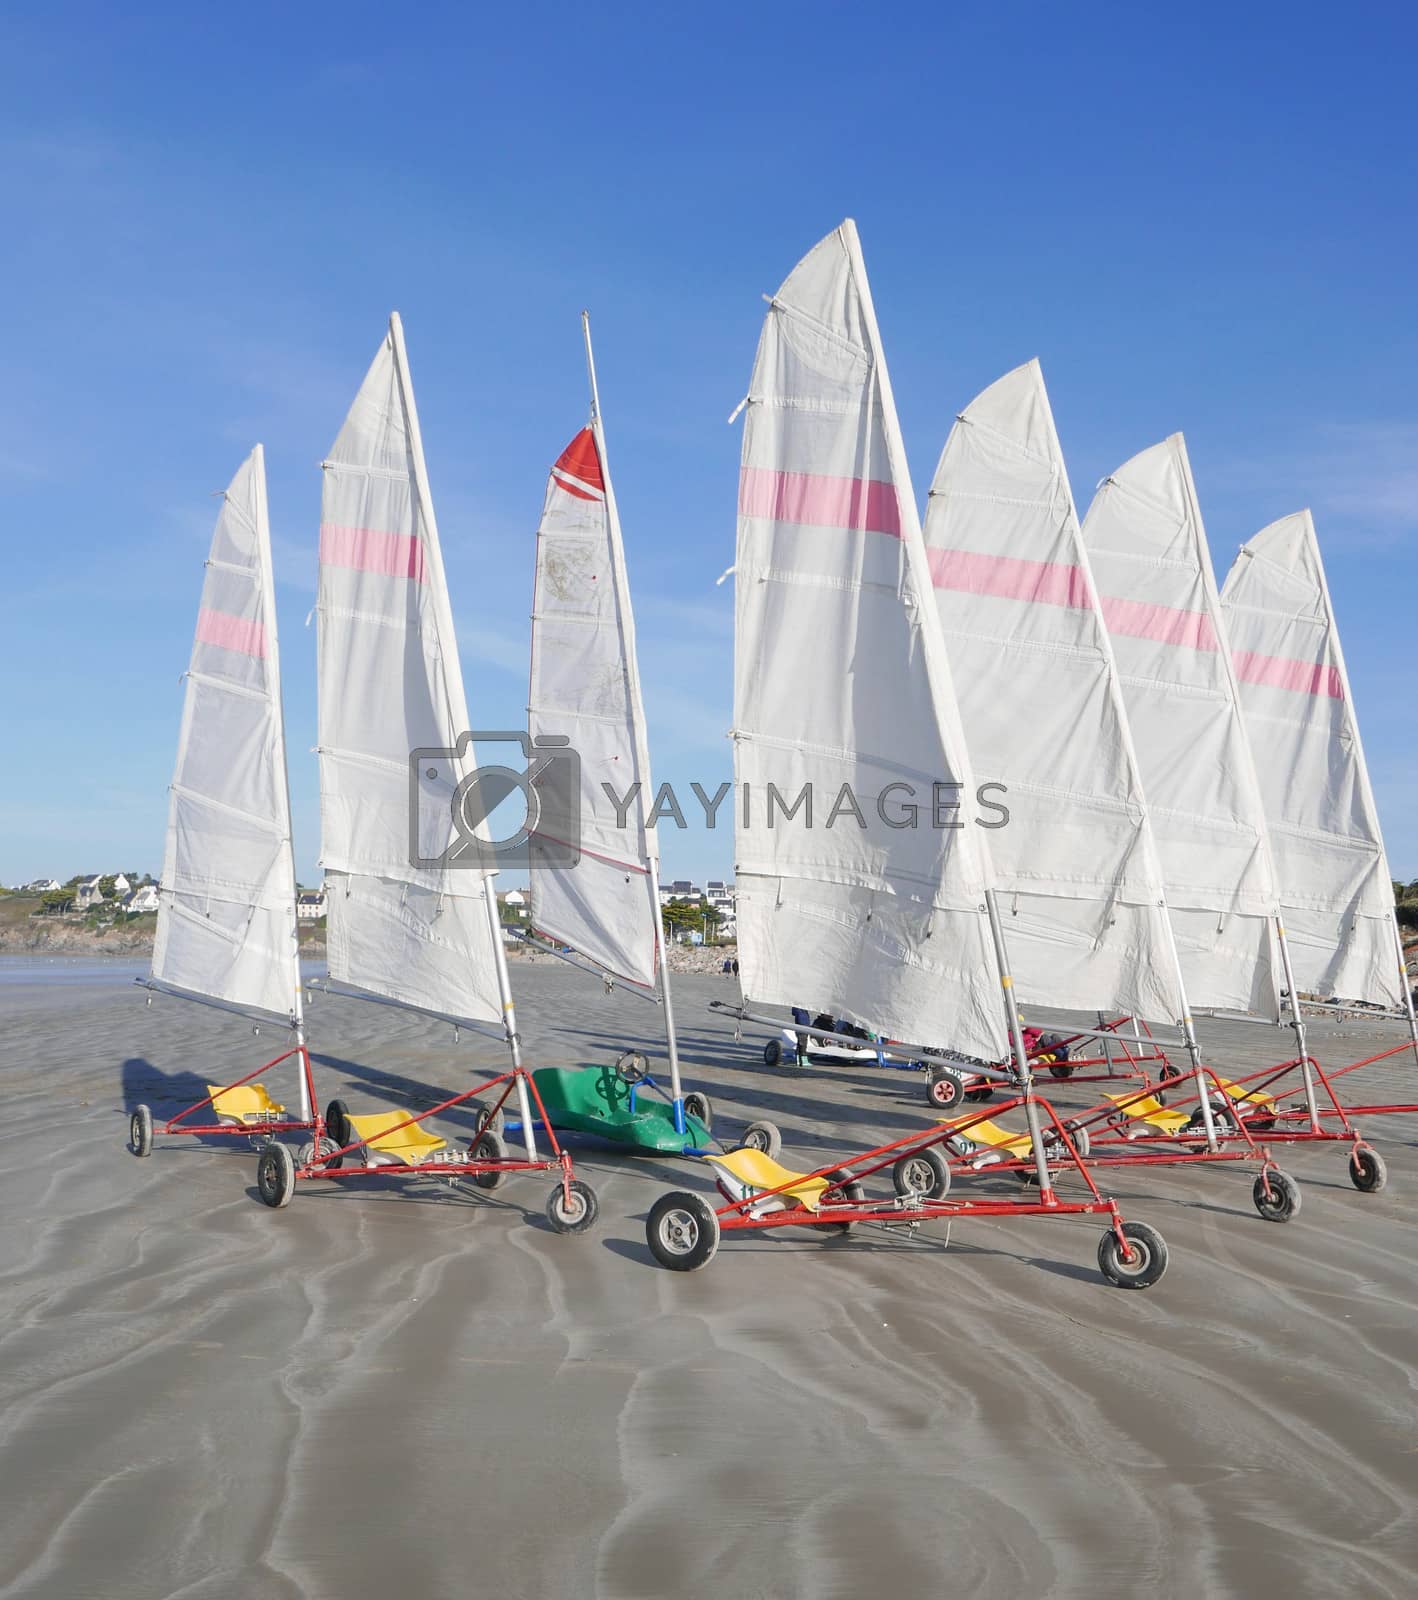 Royalty free image of sand yachting on the beach of Pentrez in finistere by shovag